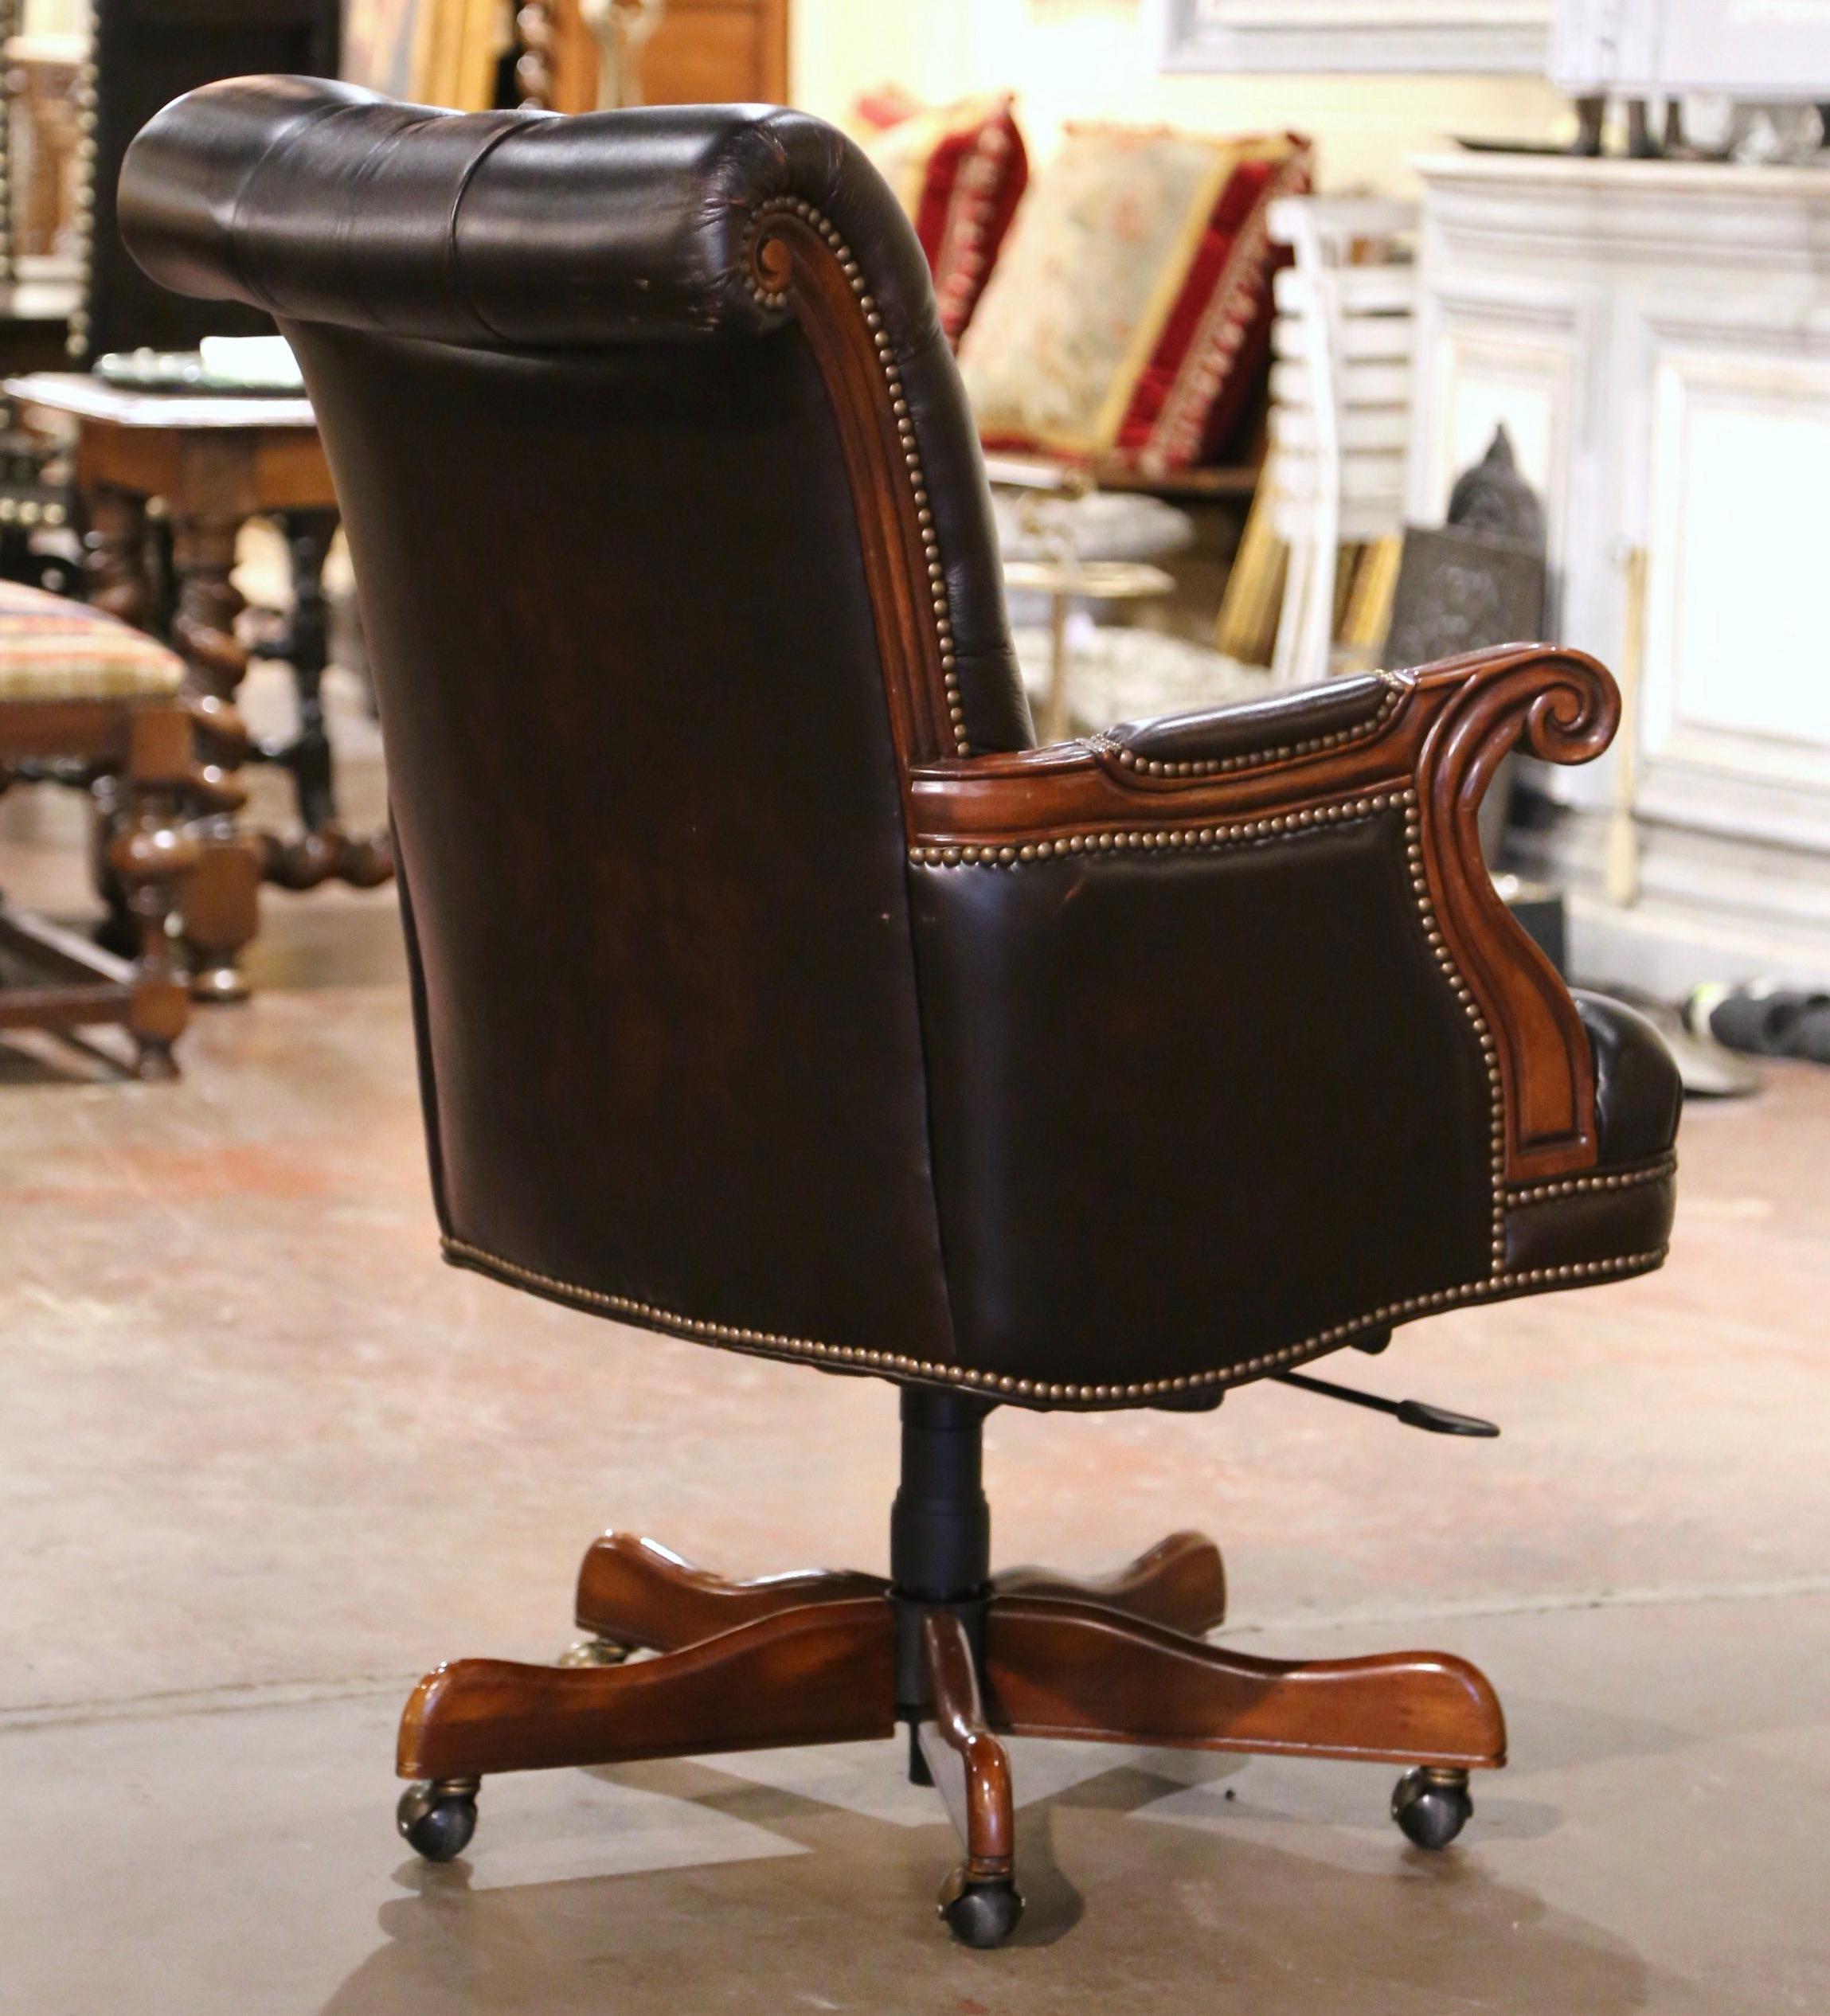 Vintage Adjustable and Swivel Executive Office Desk Armchair with Tufted Leather 3